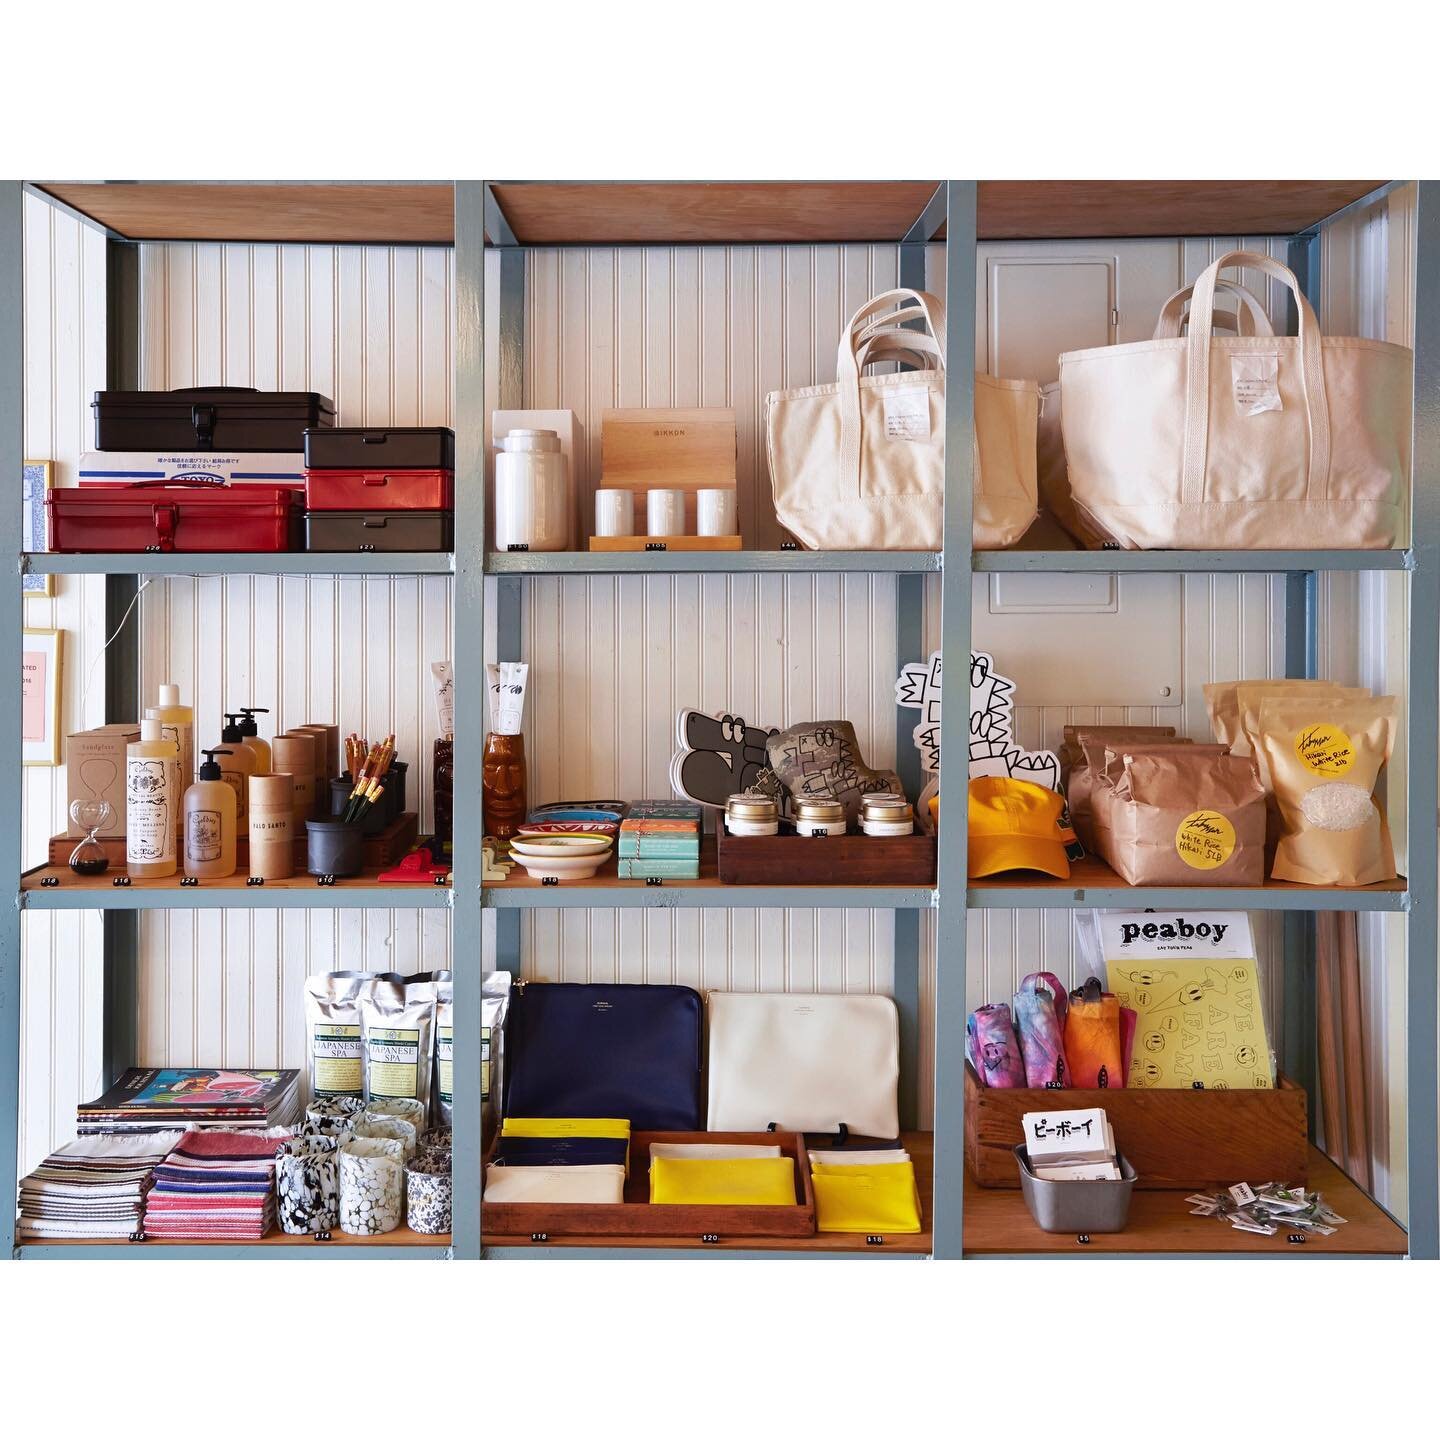 ThE GifT ShoP

You&rsquo;ve been missing a cozy gift shop/general store in LIC. We heard, and just built one! Selected quality goodies are now available at @takumenlic. Perfect for gift/souvenir shopping for your loved ones. New products are added re